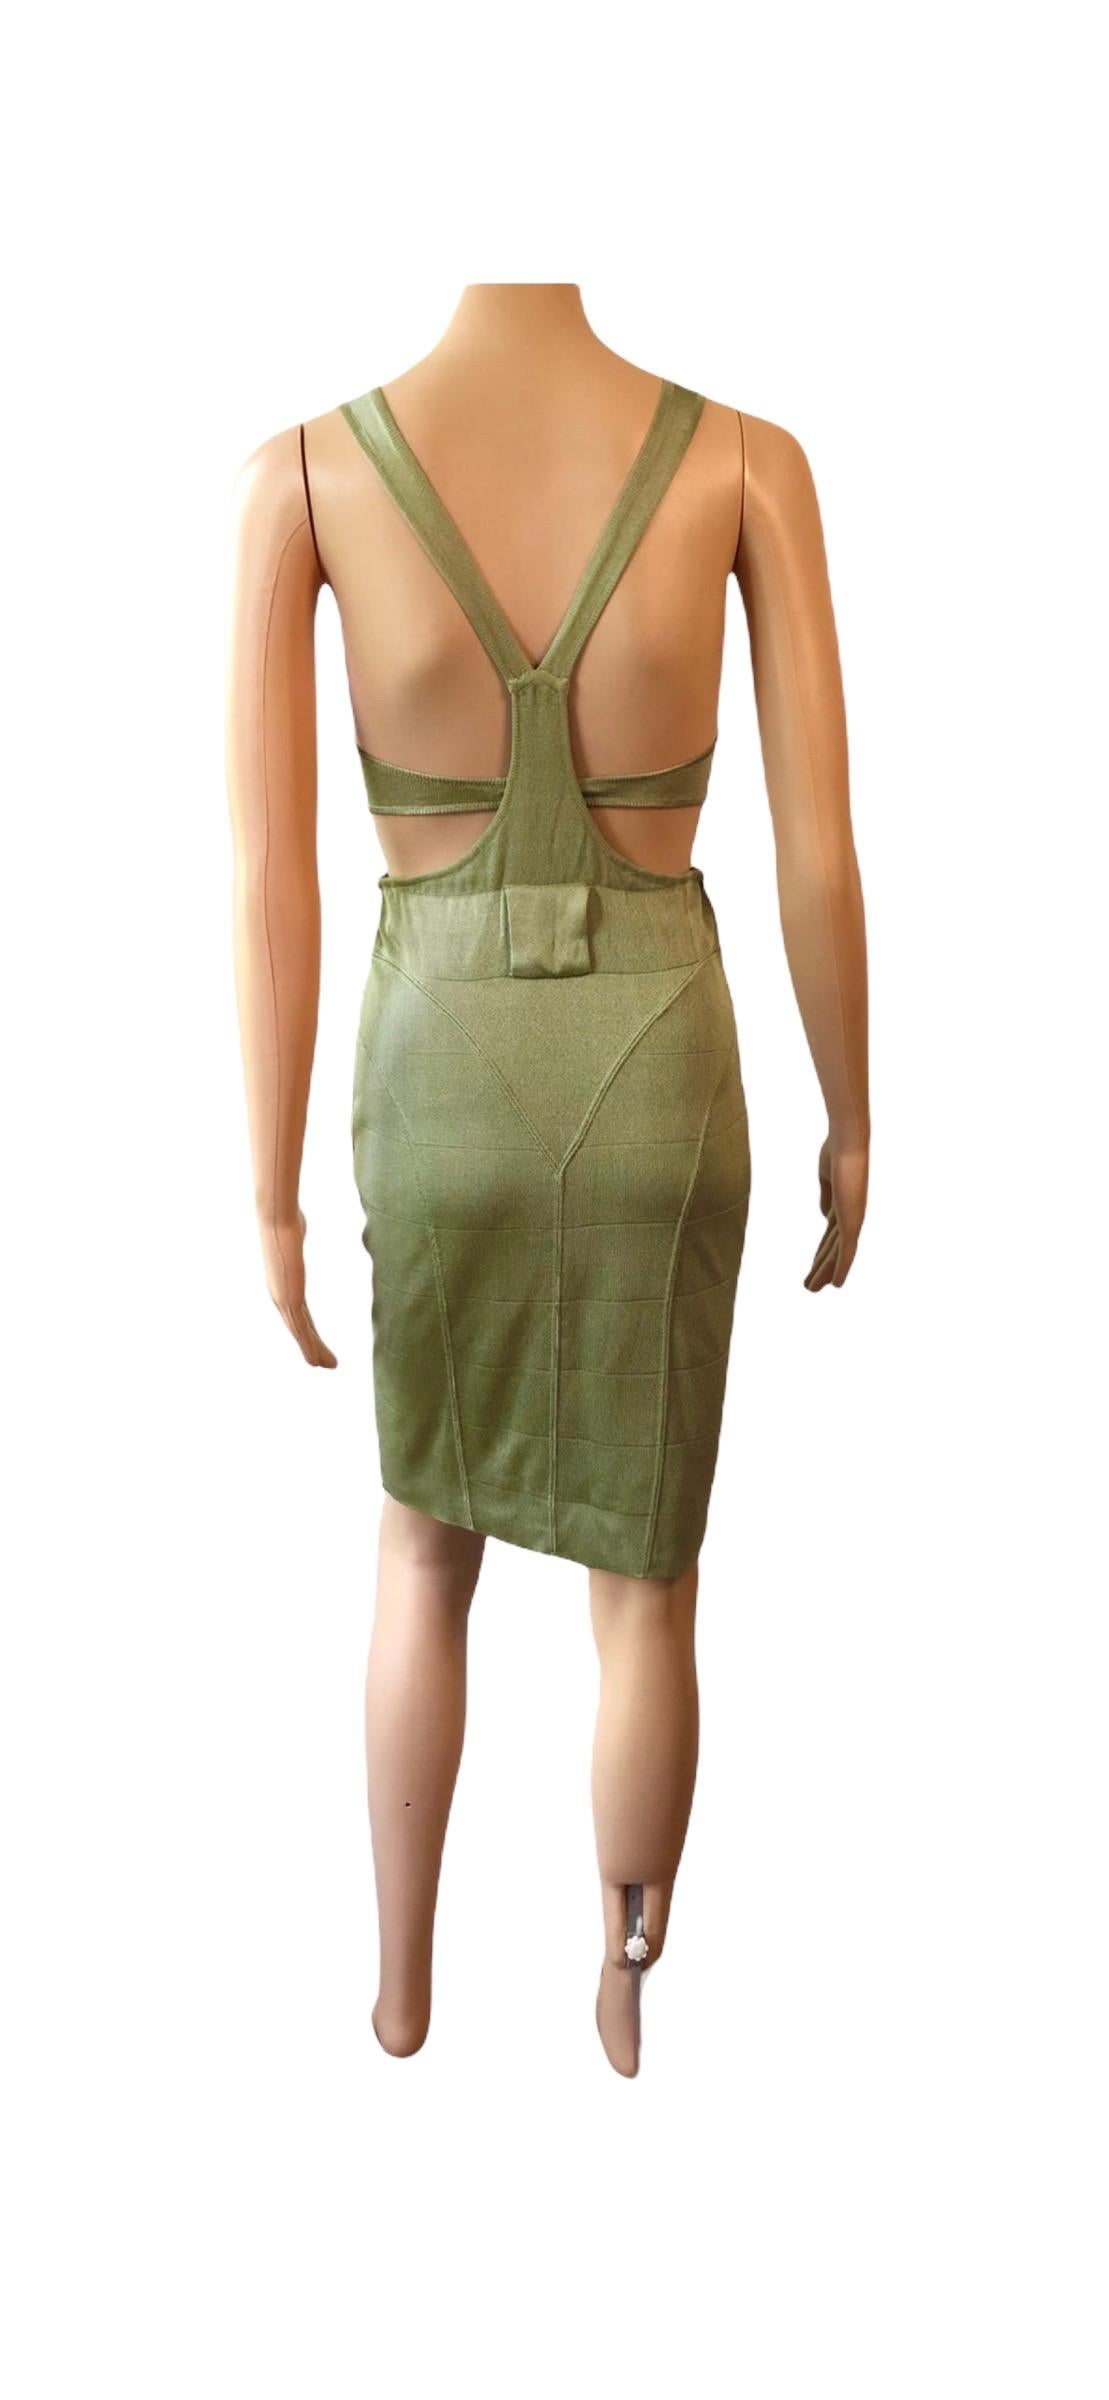 Azzedine Alaia S/S 1985 Vintage Plunged Cutout Bodycon Green Dress For Sale 8